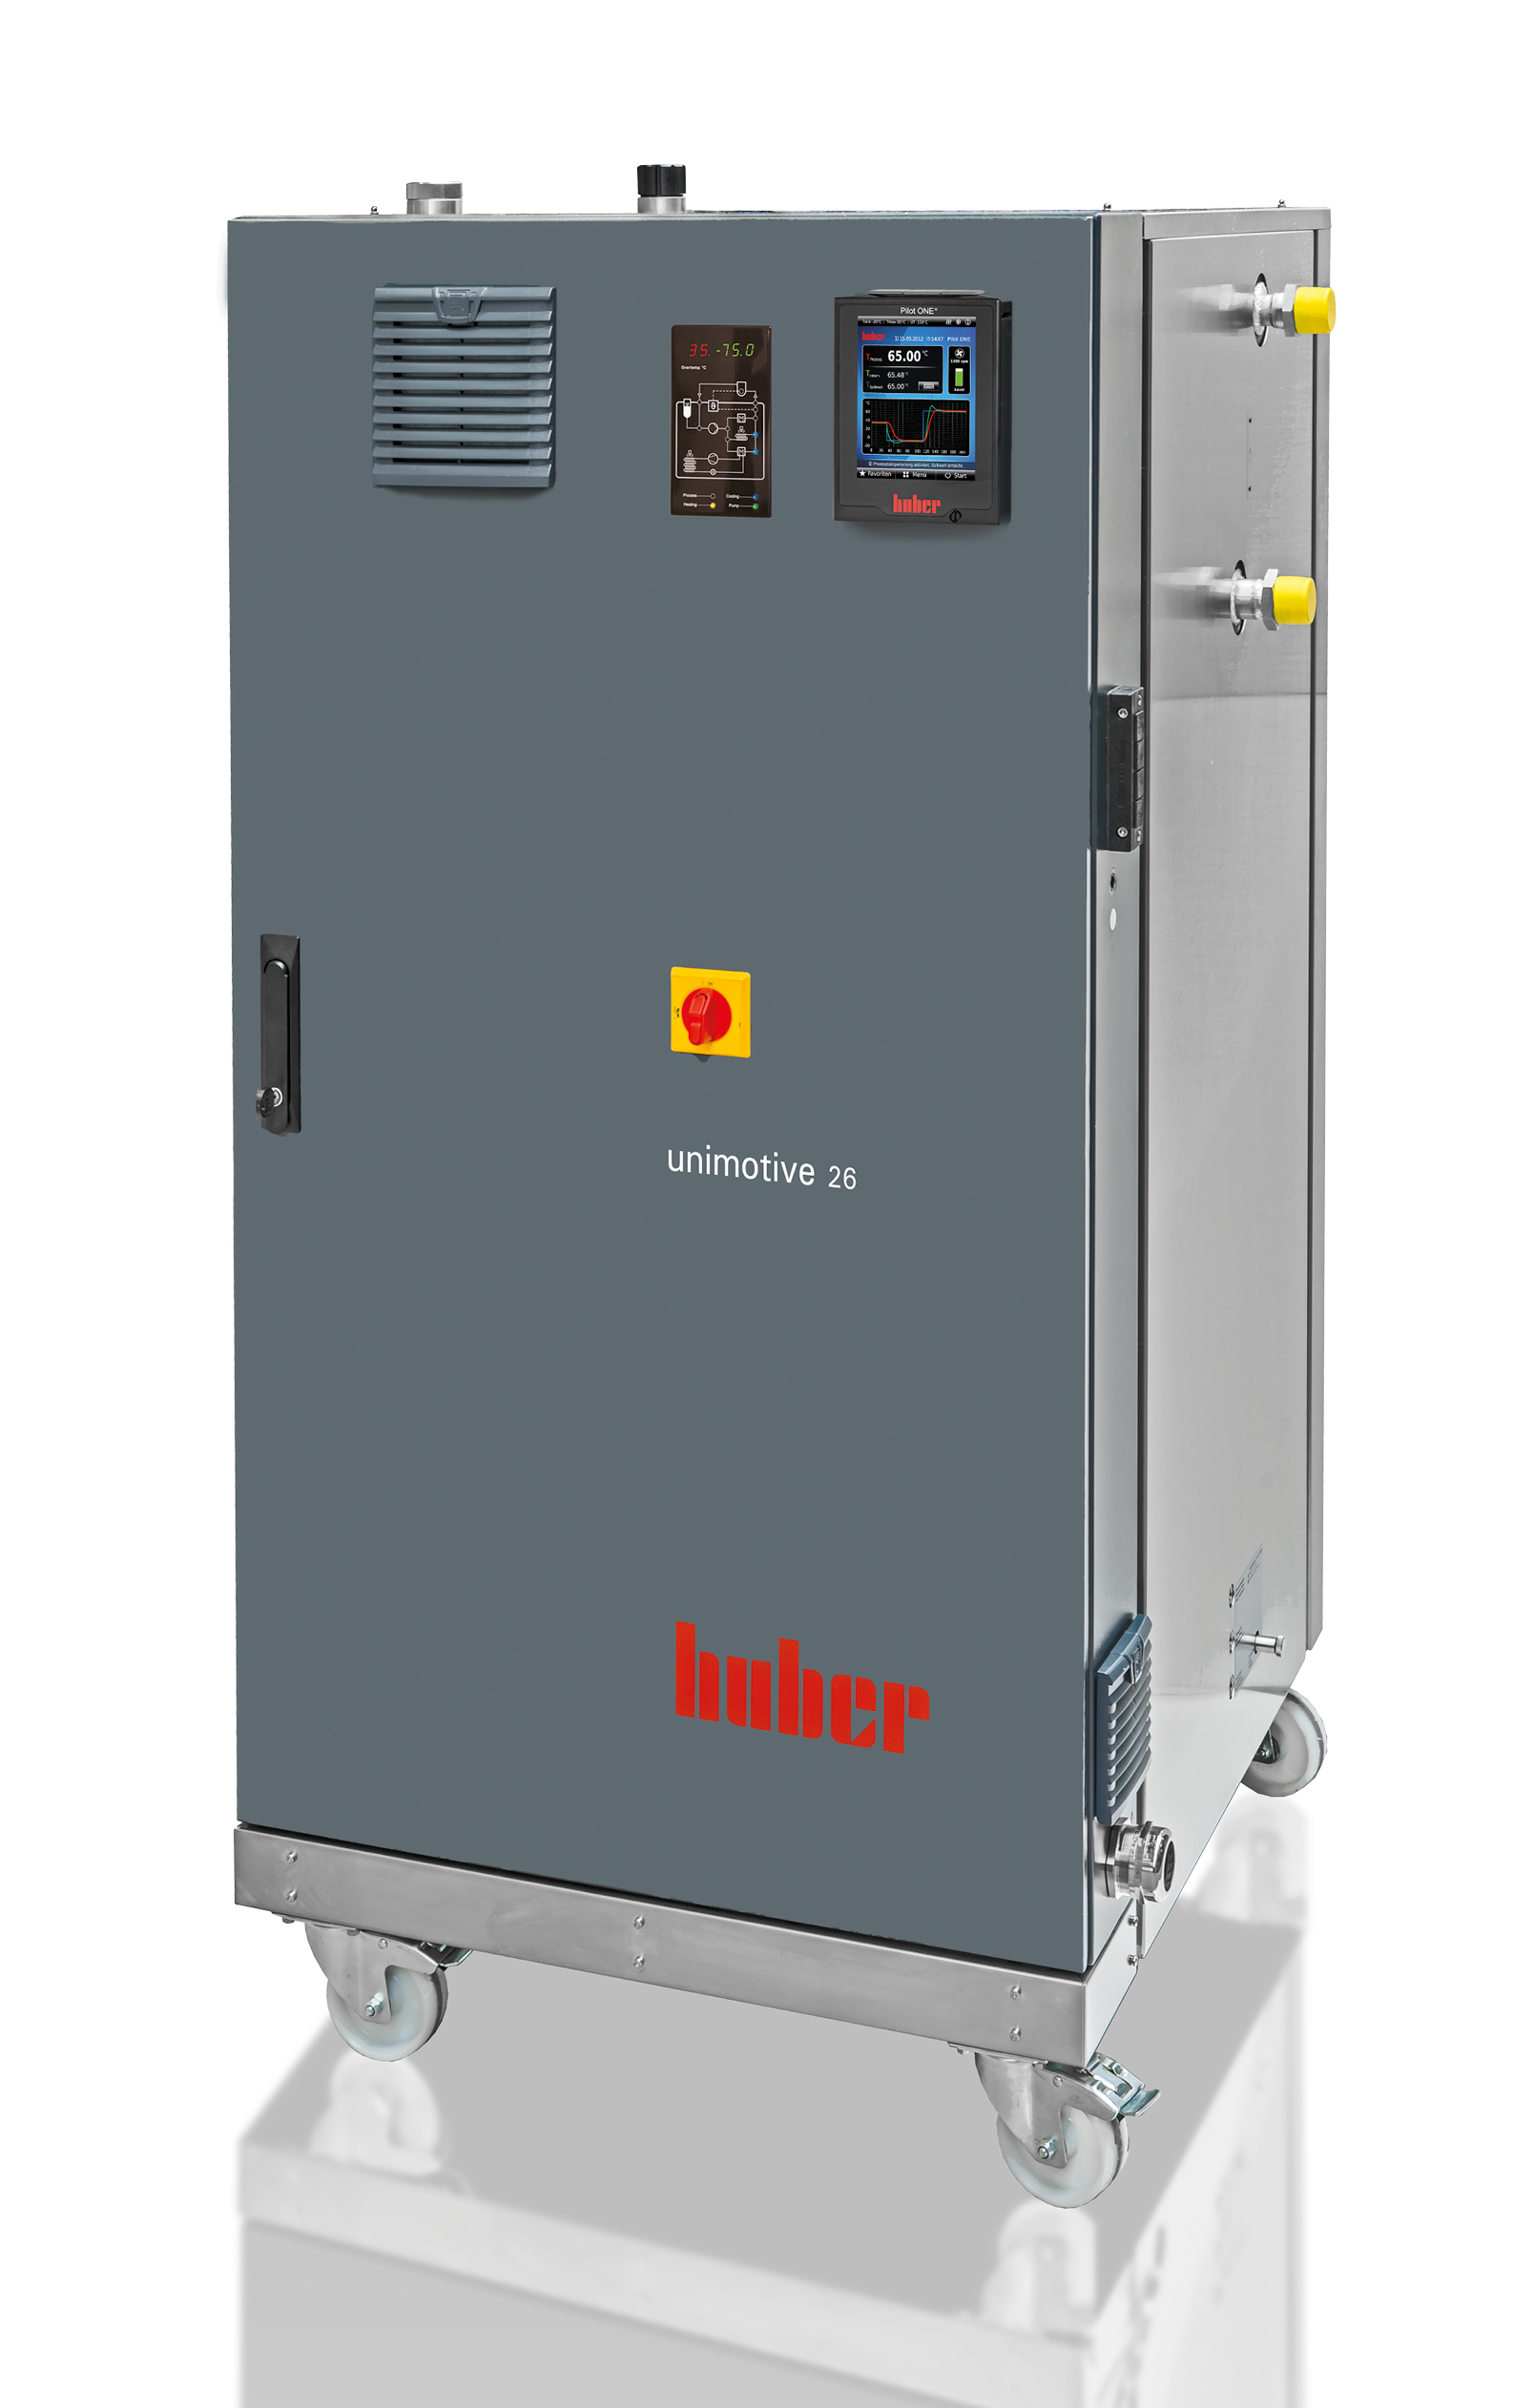 The new Huber Unimotive temperature control systems are a strong choice with their unique thermodynamics and control accuracy for operation with water-ethylene glycol mixtures up to -45°C